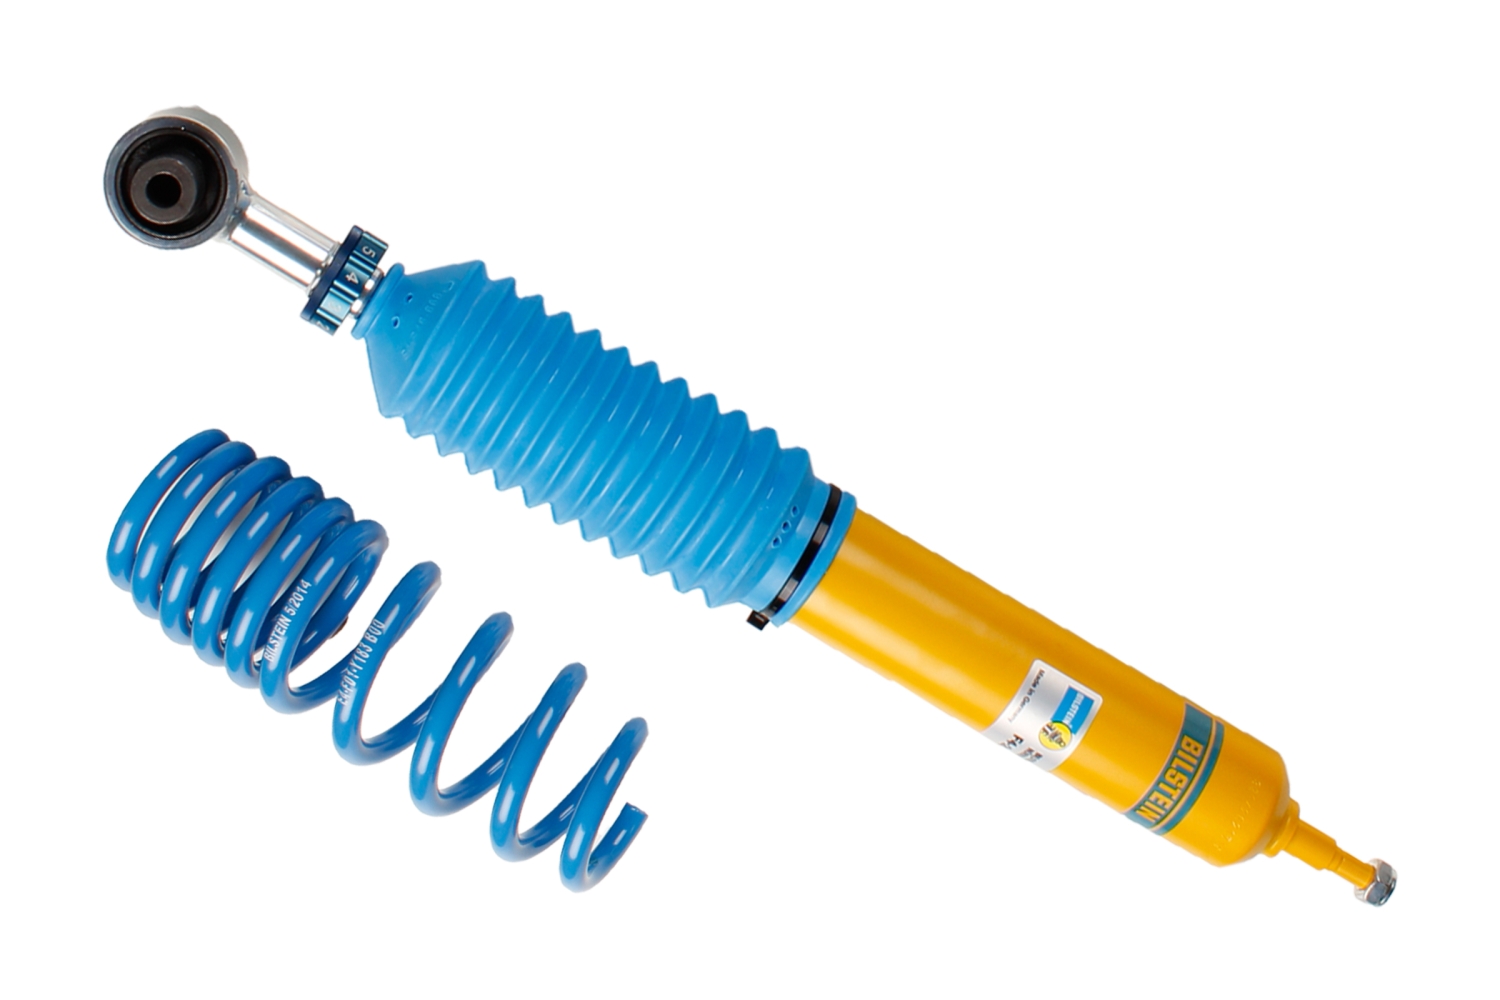 Bilstein B16 PSS10 coilovers 48-217170 BMW - 3 Serie F31 Touring - 316 d, 318 d, 320 d, 320 i, 328 i, 330 d 85 -190 kW - 01/12-